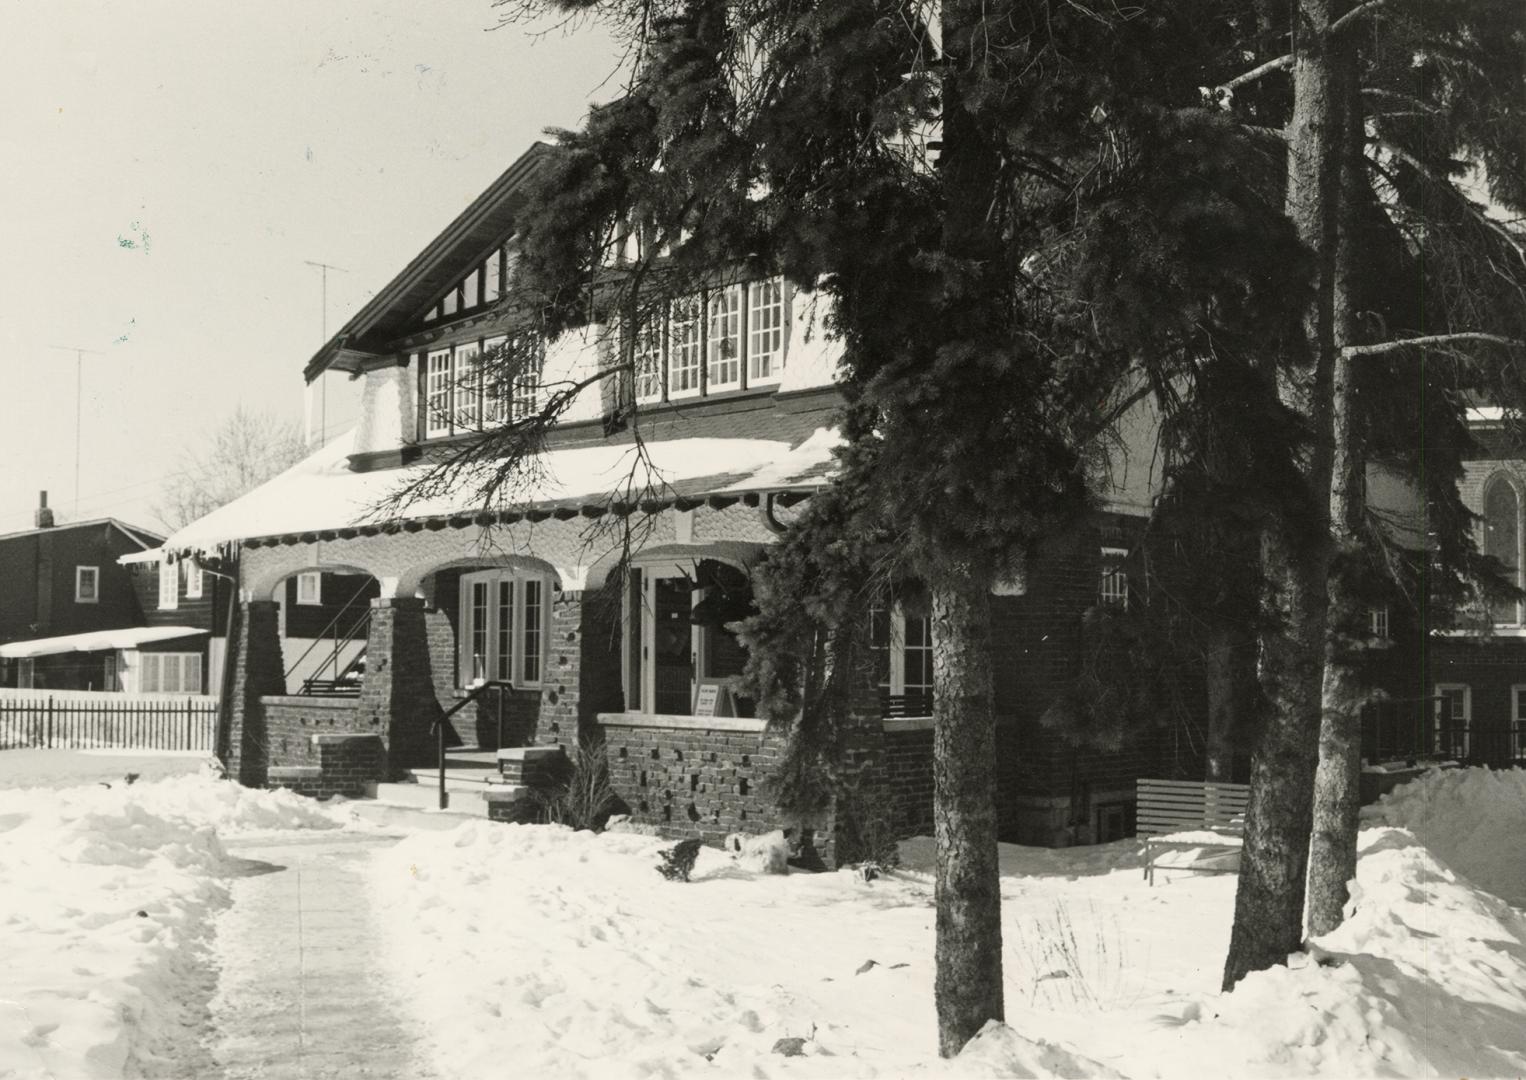 Picture of an arts and craft style house with lawn covered in snow. 